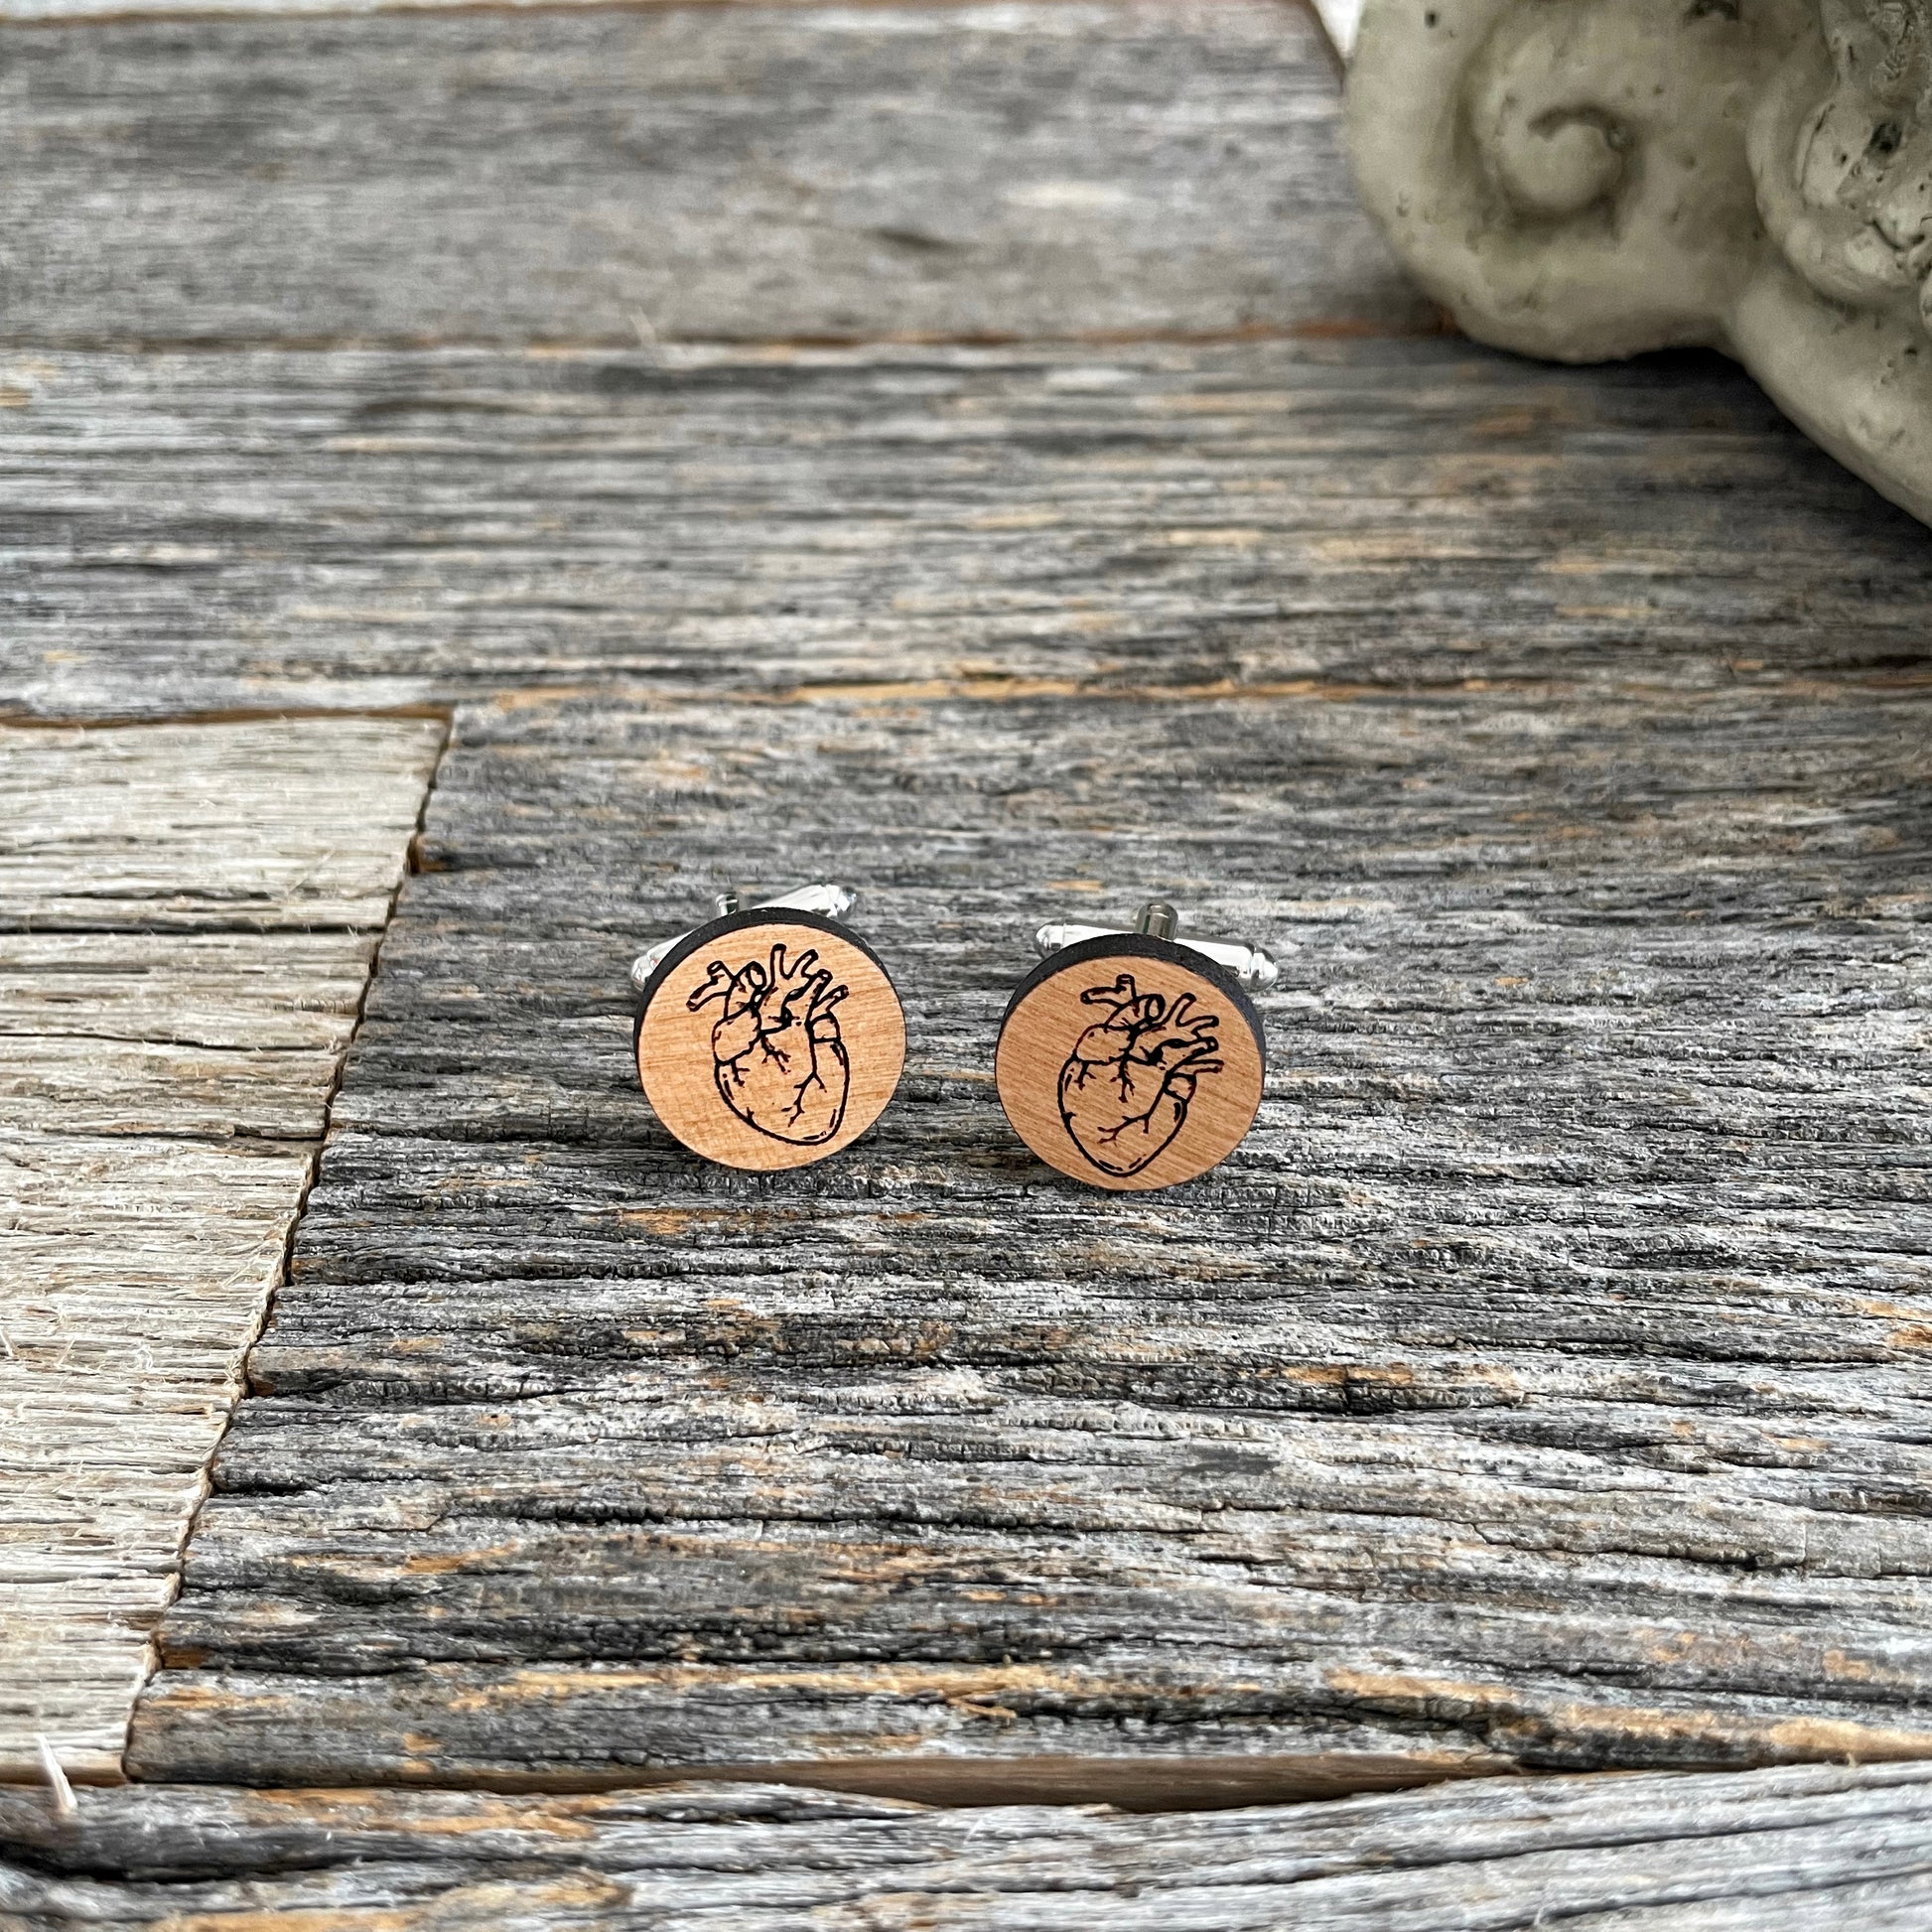 Laser engraved wooden cufflinks with a drawing of a heart